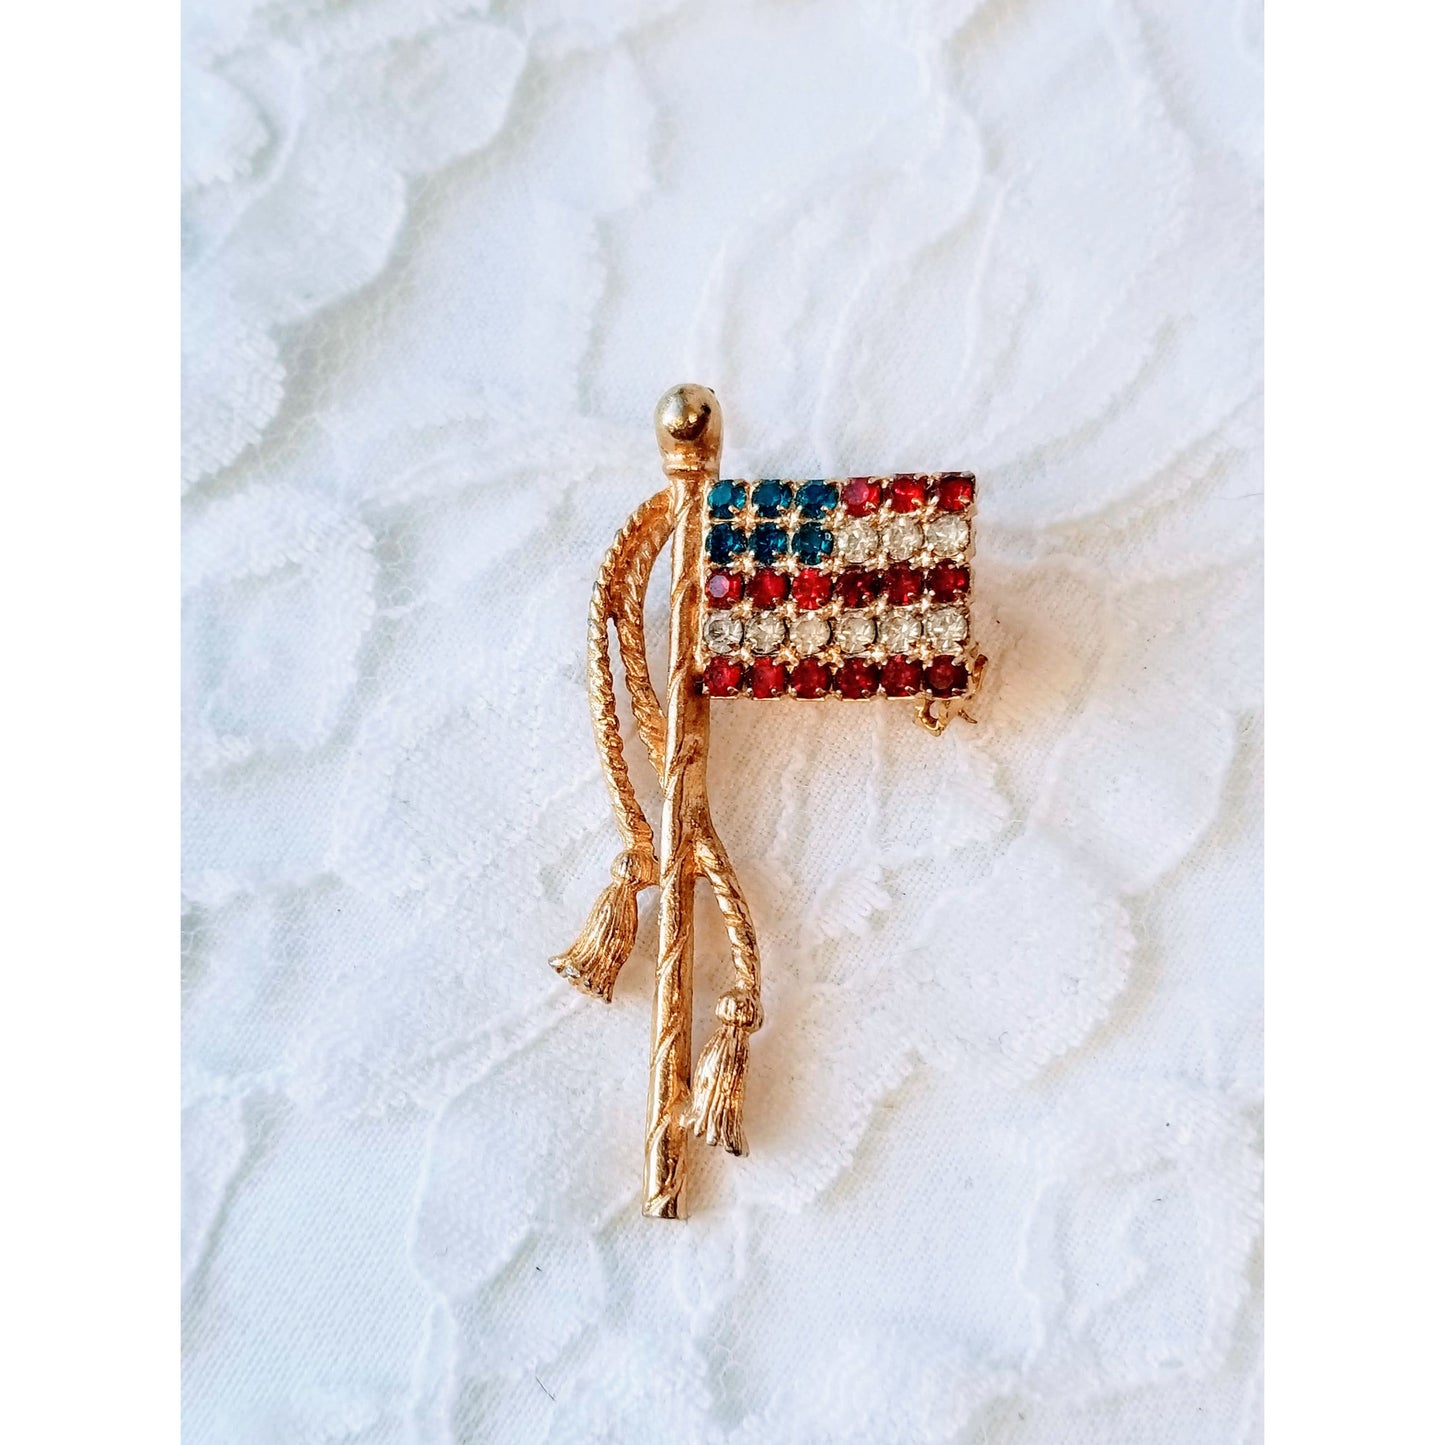 Vintage American Flag Brooch ~ Fourth of July ~ Memorial Day Jewelry ~ Rhinestone ~ Red, White and Blue ~ Gold Tone Pin Brooch